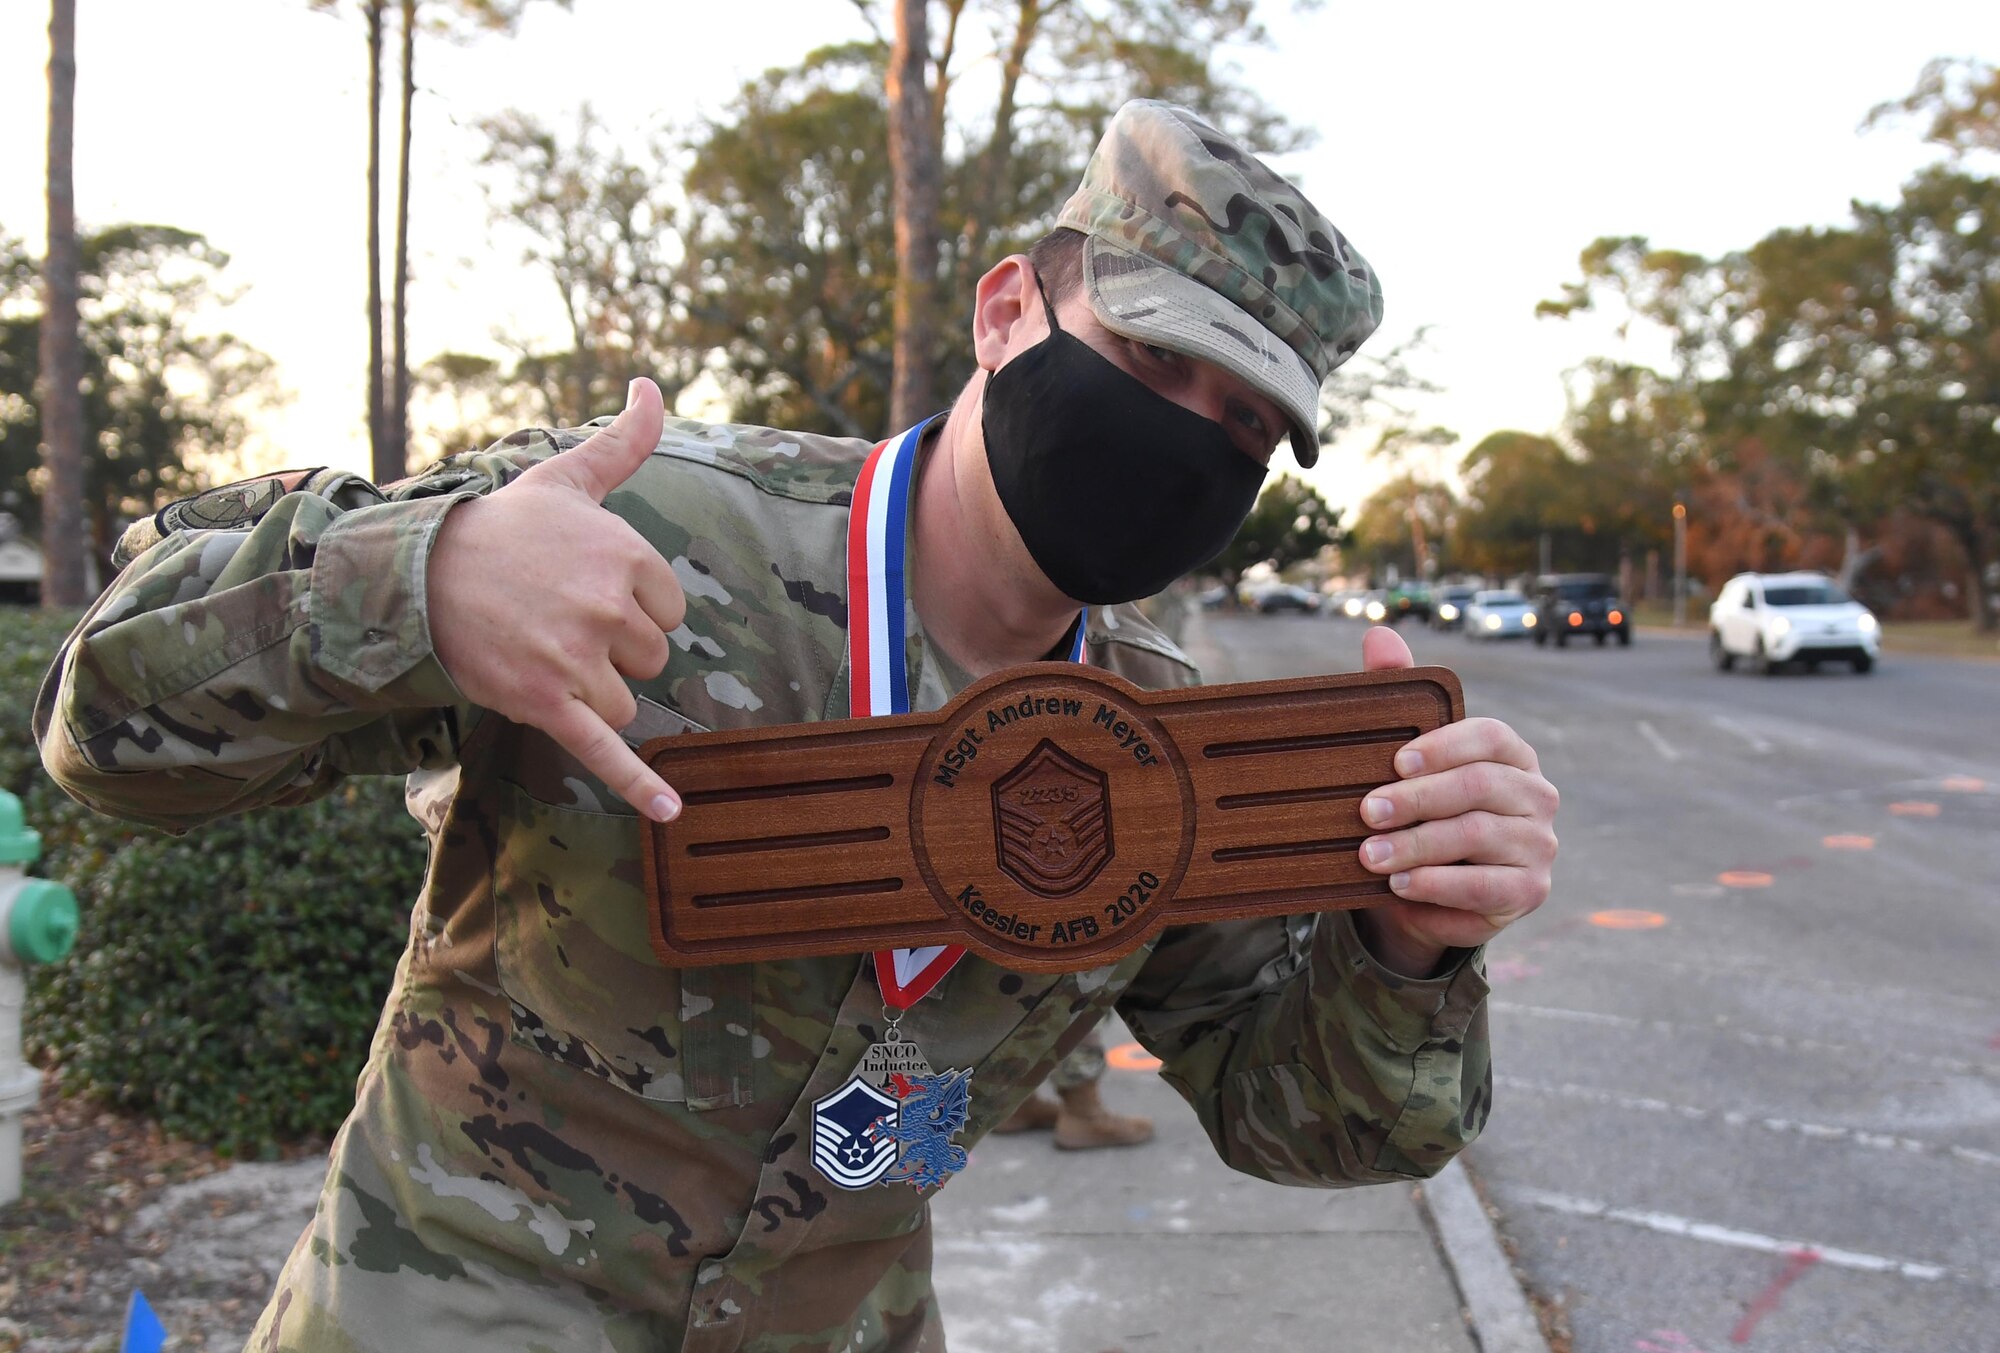 U.S. Air Force Tech. Sgt. Andrew Meyer, 334th Training Squadron instructor, holds a plaque during the Keesler Senior Noncommissioned Officer Induction Ceremony outside Mathies Hall at Keesler Air Force Base, Mississippi, Nov. 19, 2020. Over 20 Airmen were recognized during the ceremony, which also included a drive-thru congratulatory parade by Keesler personnel. (U.S. Air Force photo by Kemberly Groue)